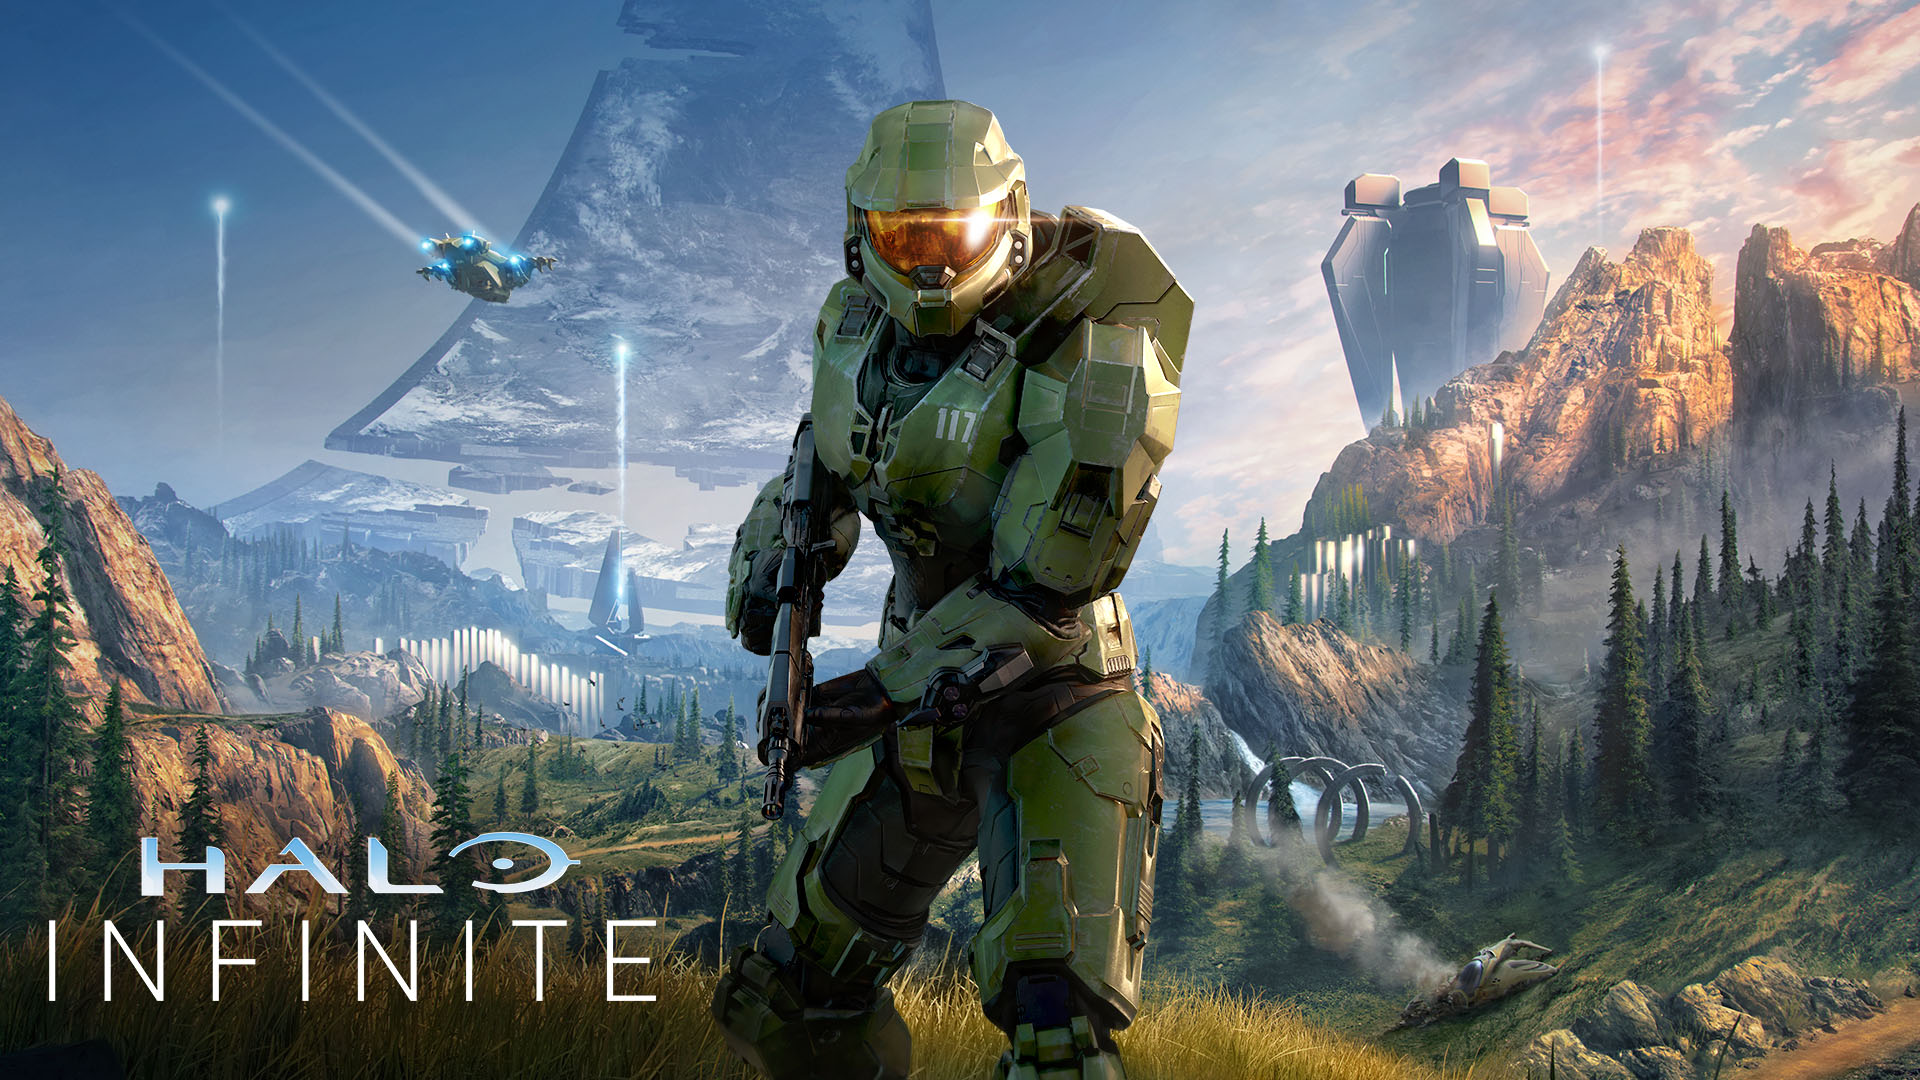 Halo Infinite’s multiplayer is free to play